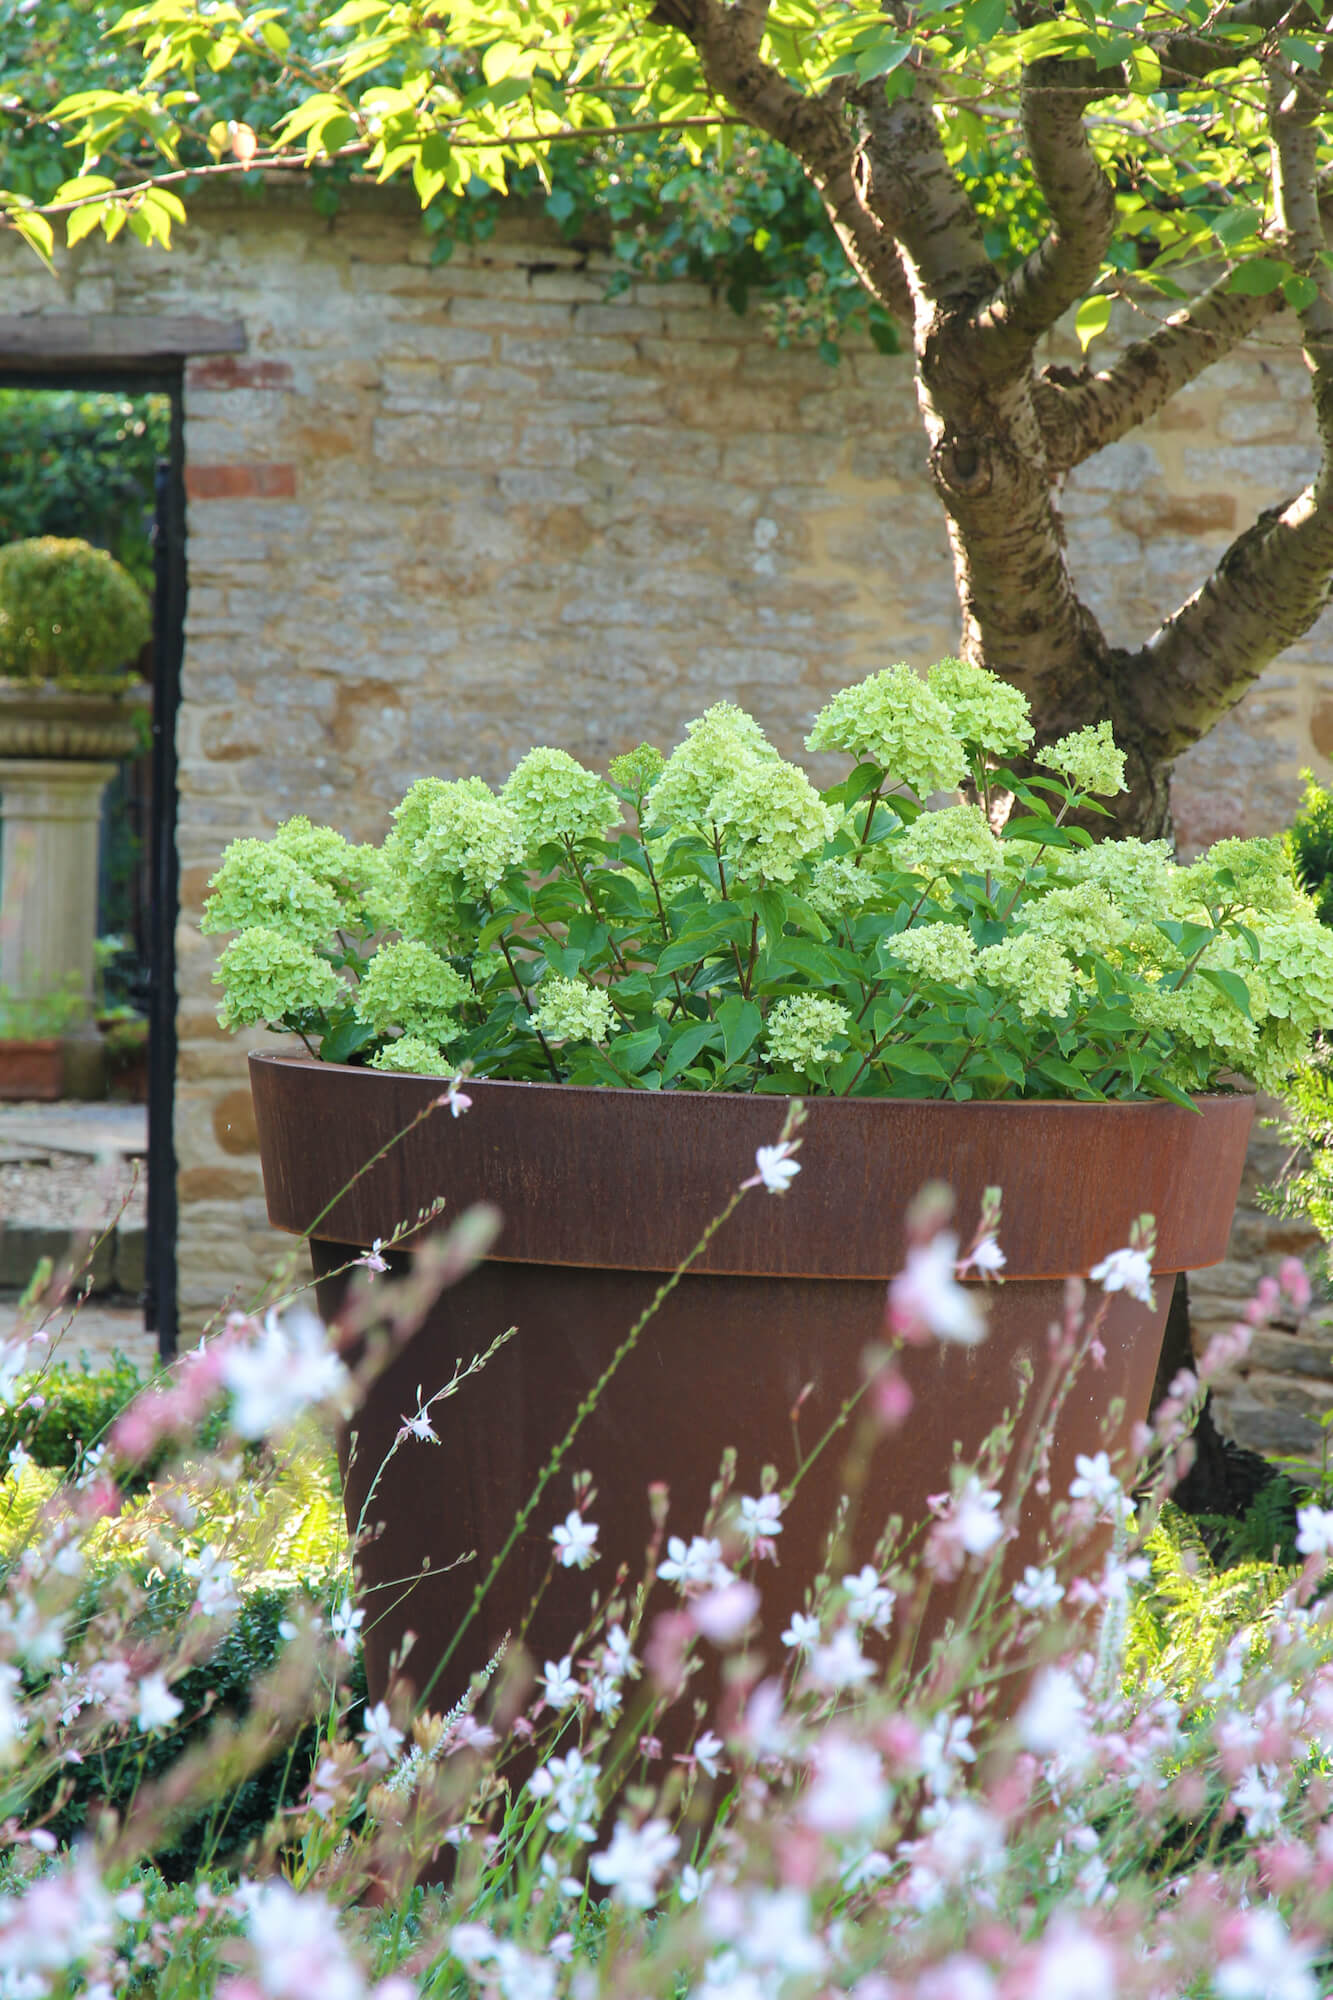 Aged rust planter filled with green viburnum and white guara in front